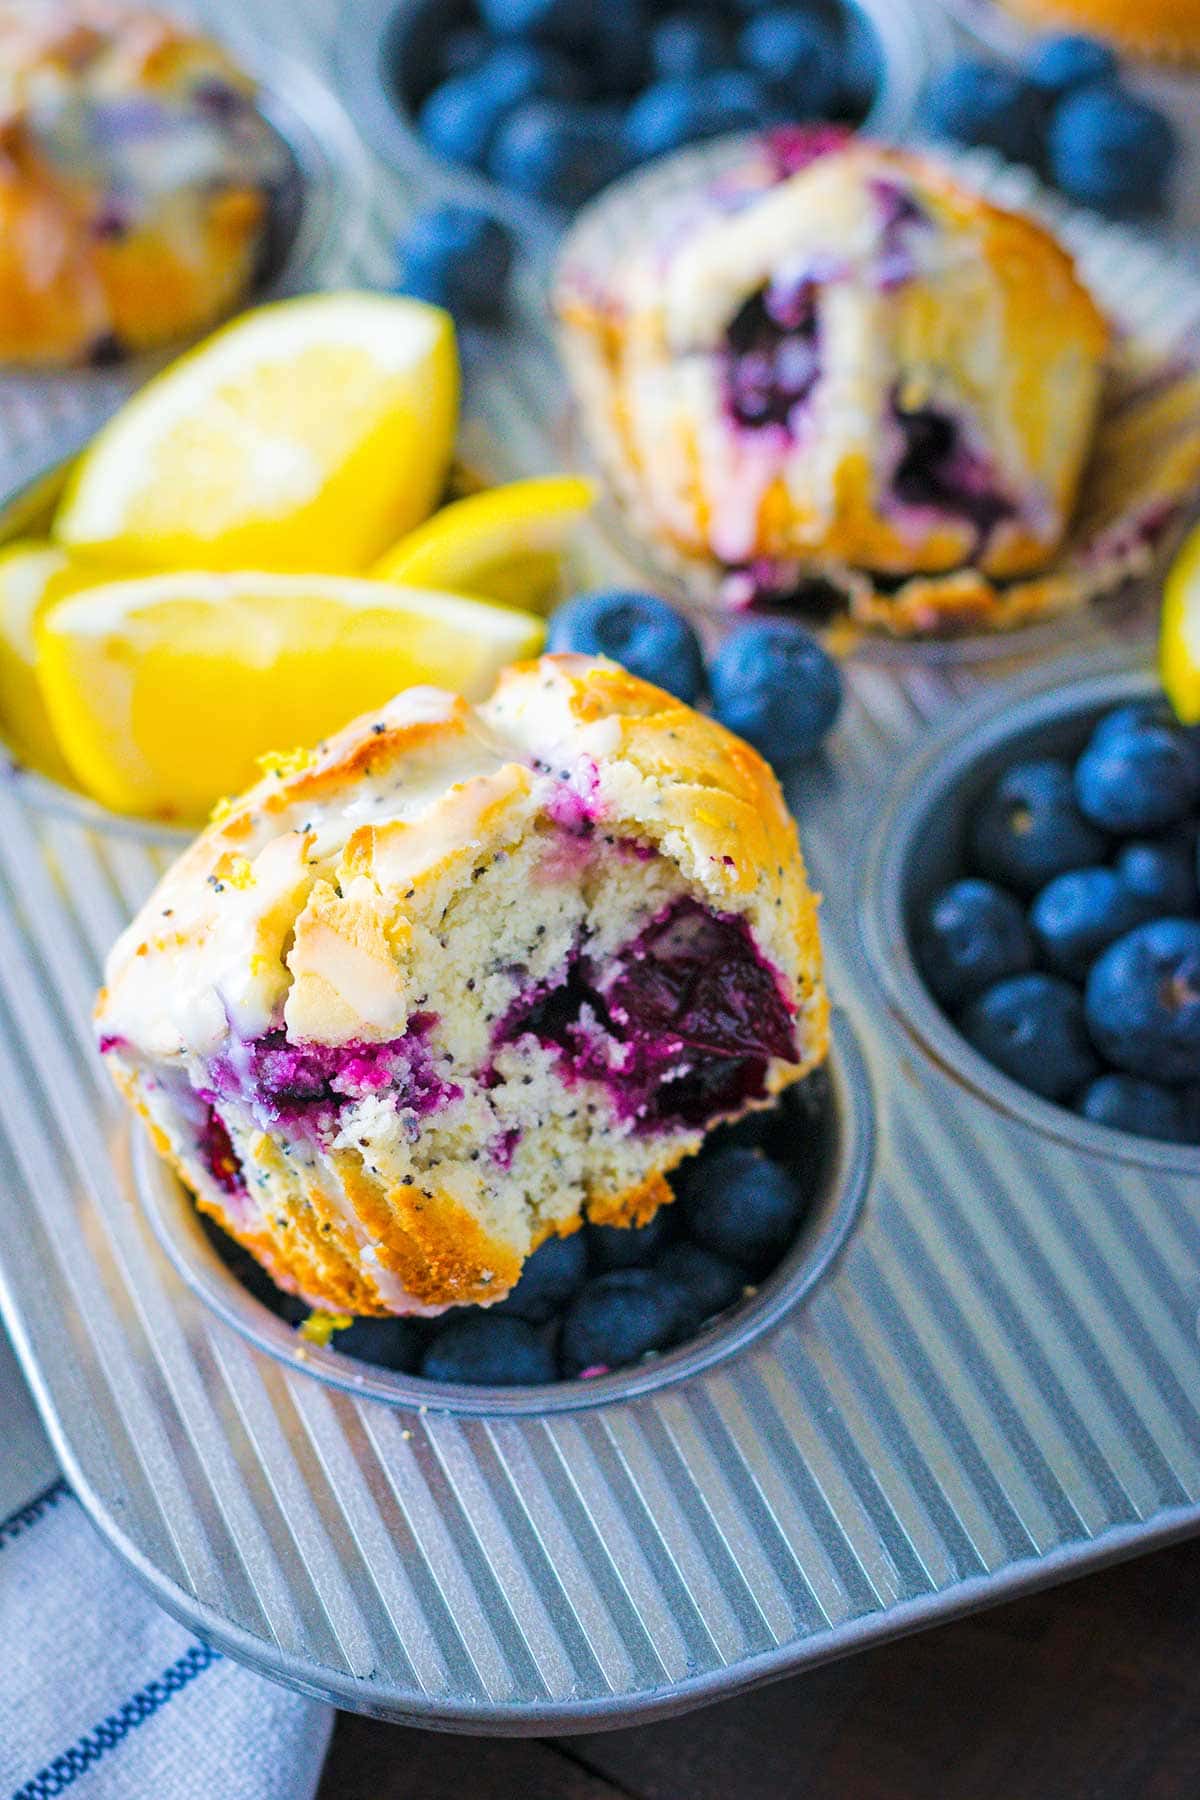 A bitten muffin on a tray with fresh lemons and blueberries.